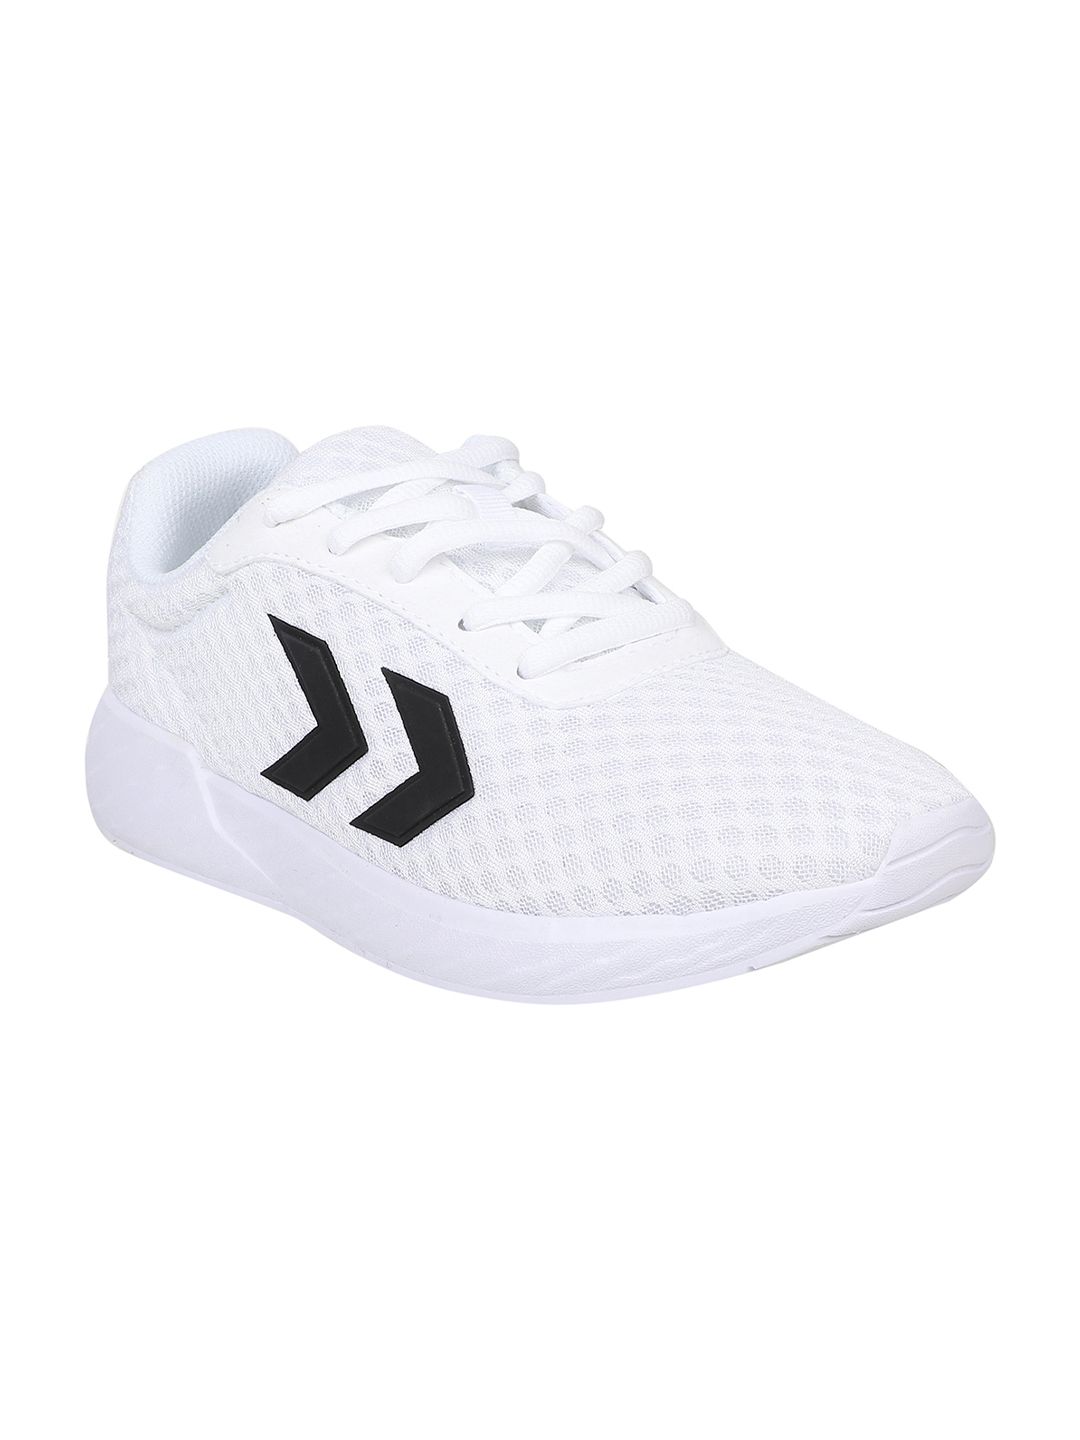 hummel Unisex White & Black Legend Breather Shoes Price in India